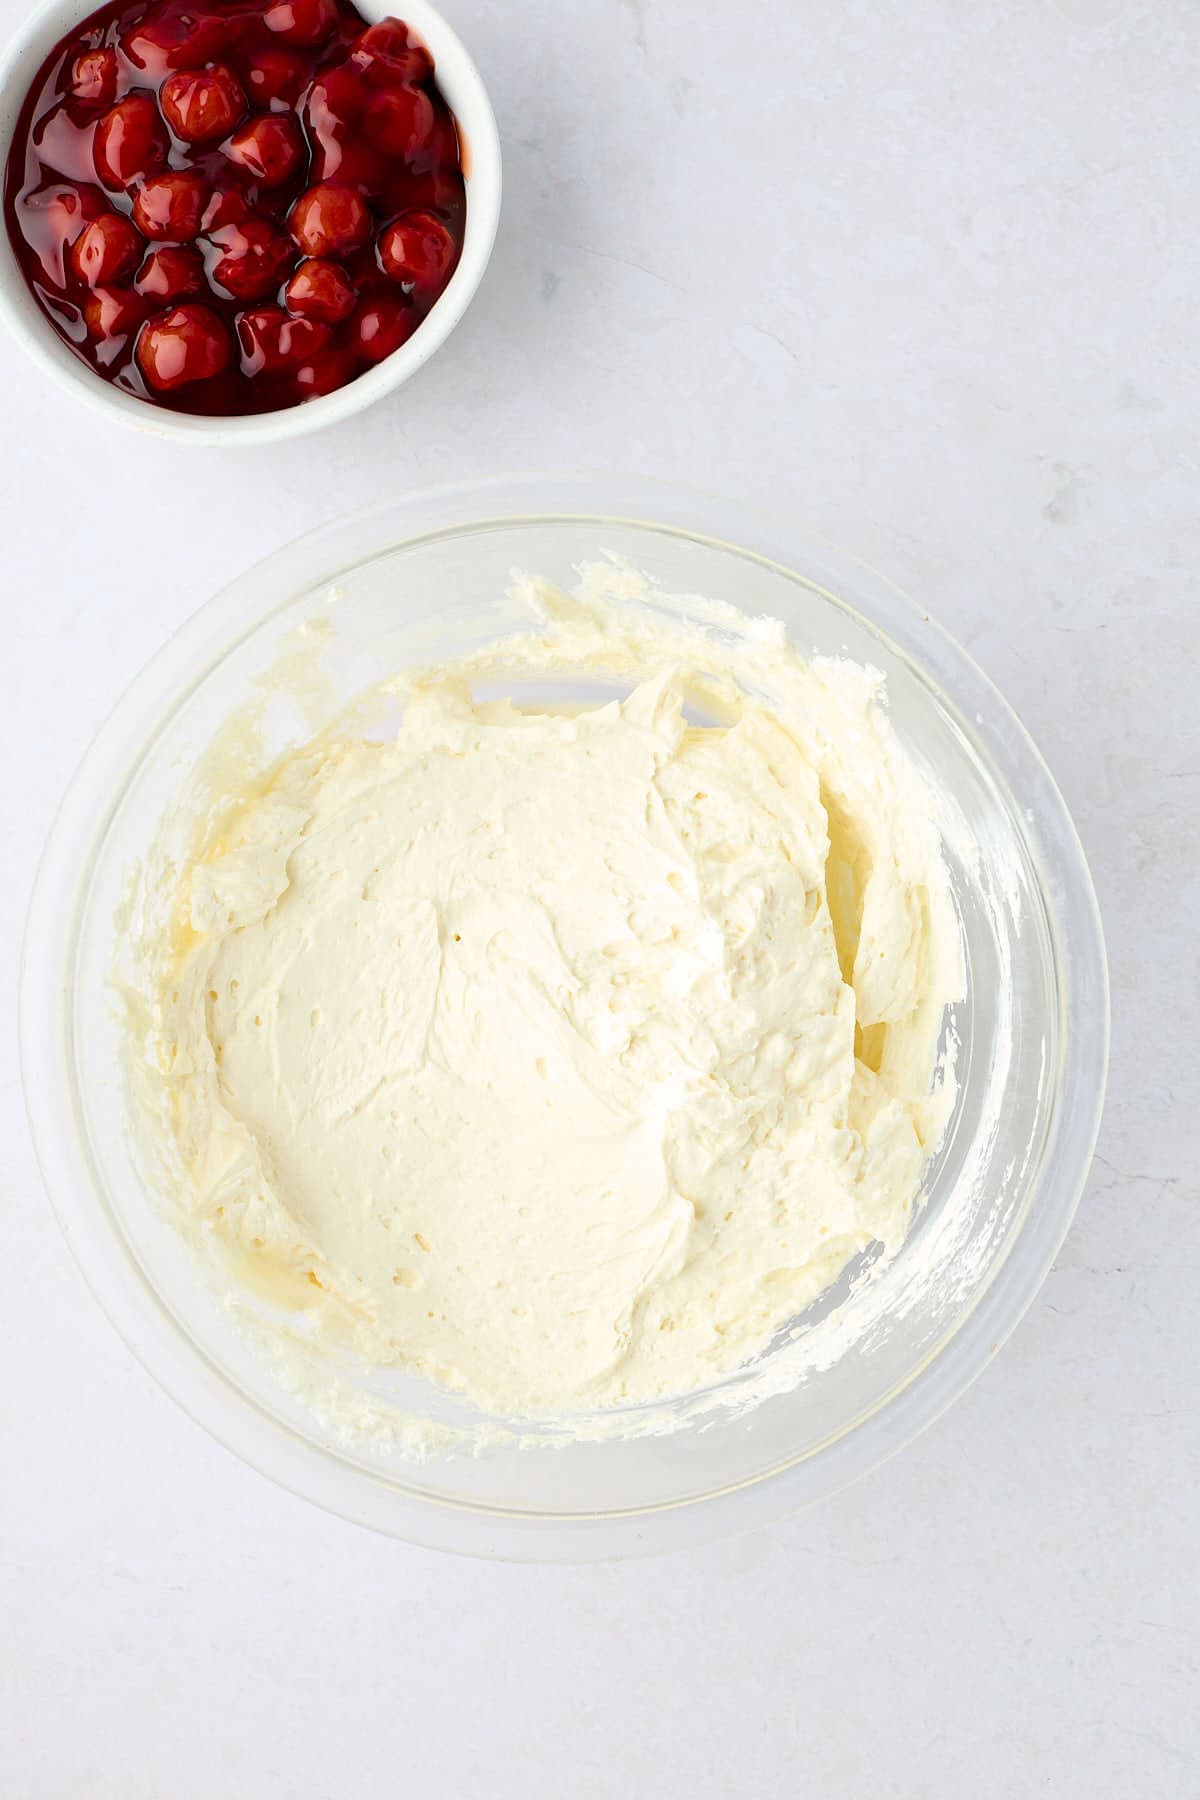 No-bake cream cheese filling with a bowl of cherries next to it.